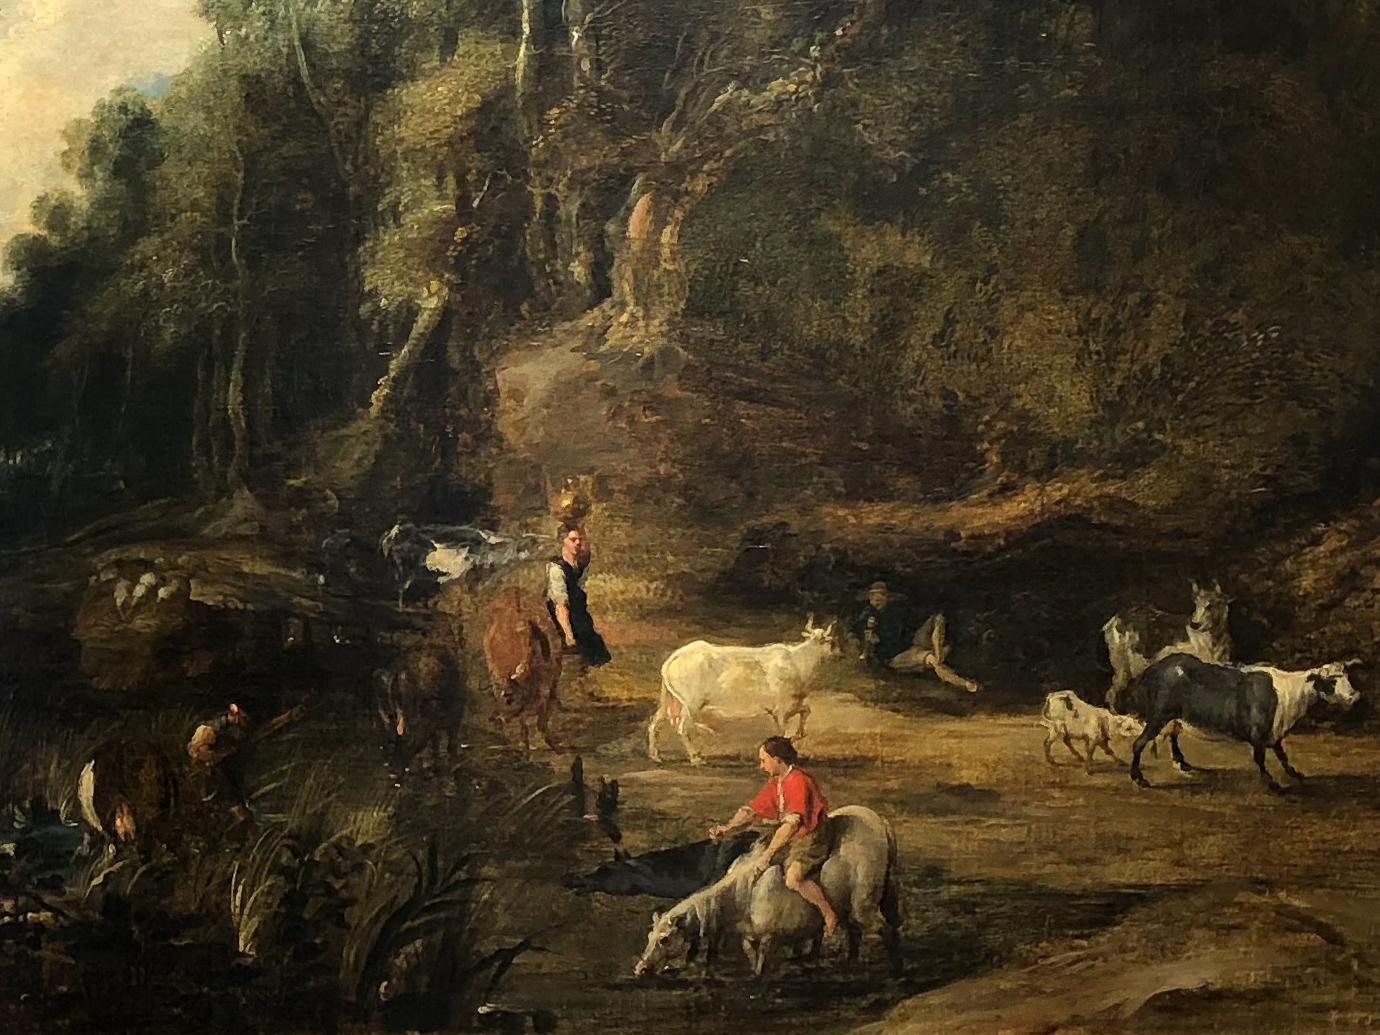 Baroque Flemish School, the Watering Hole, 17th Century Landscape and Figurative